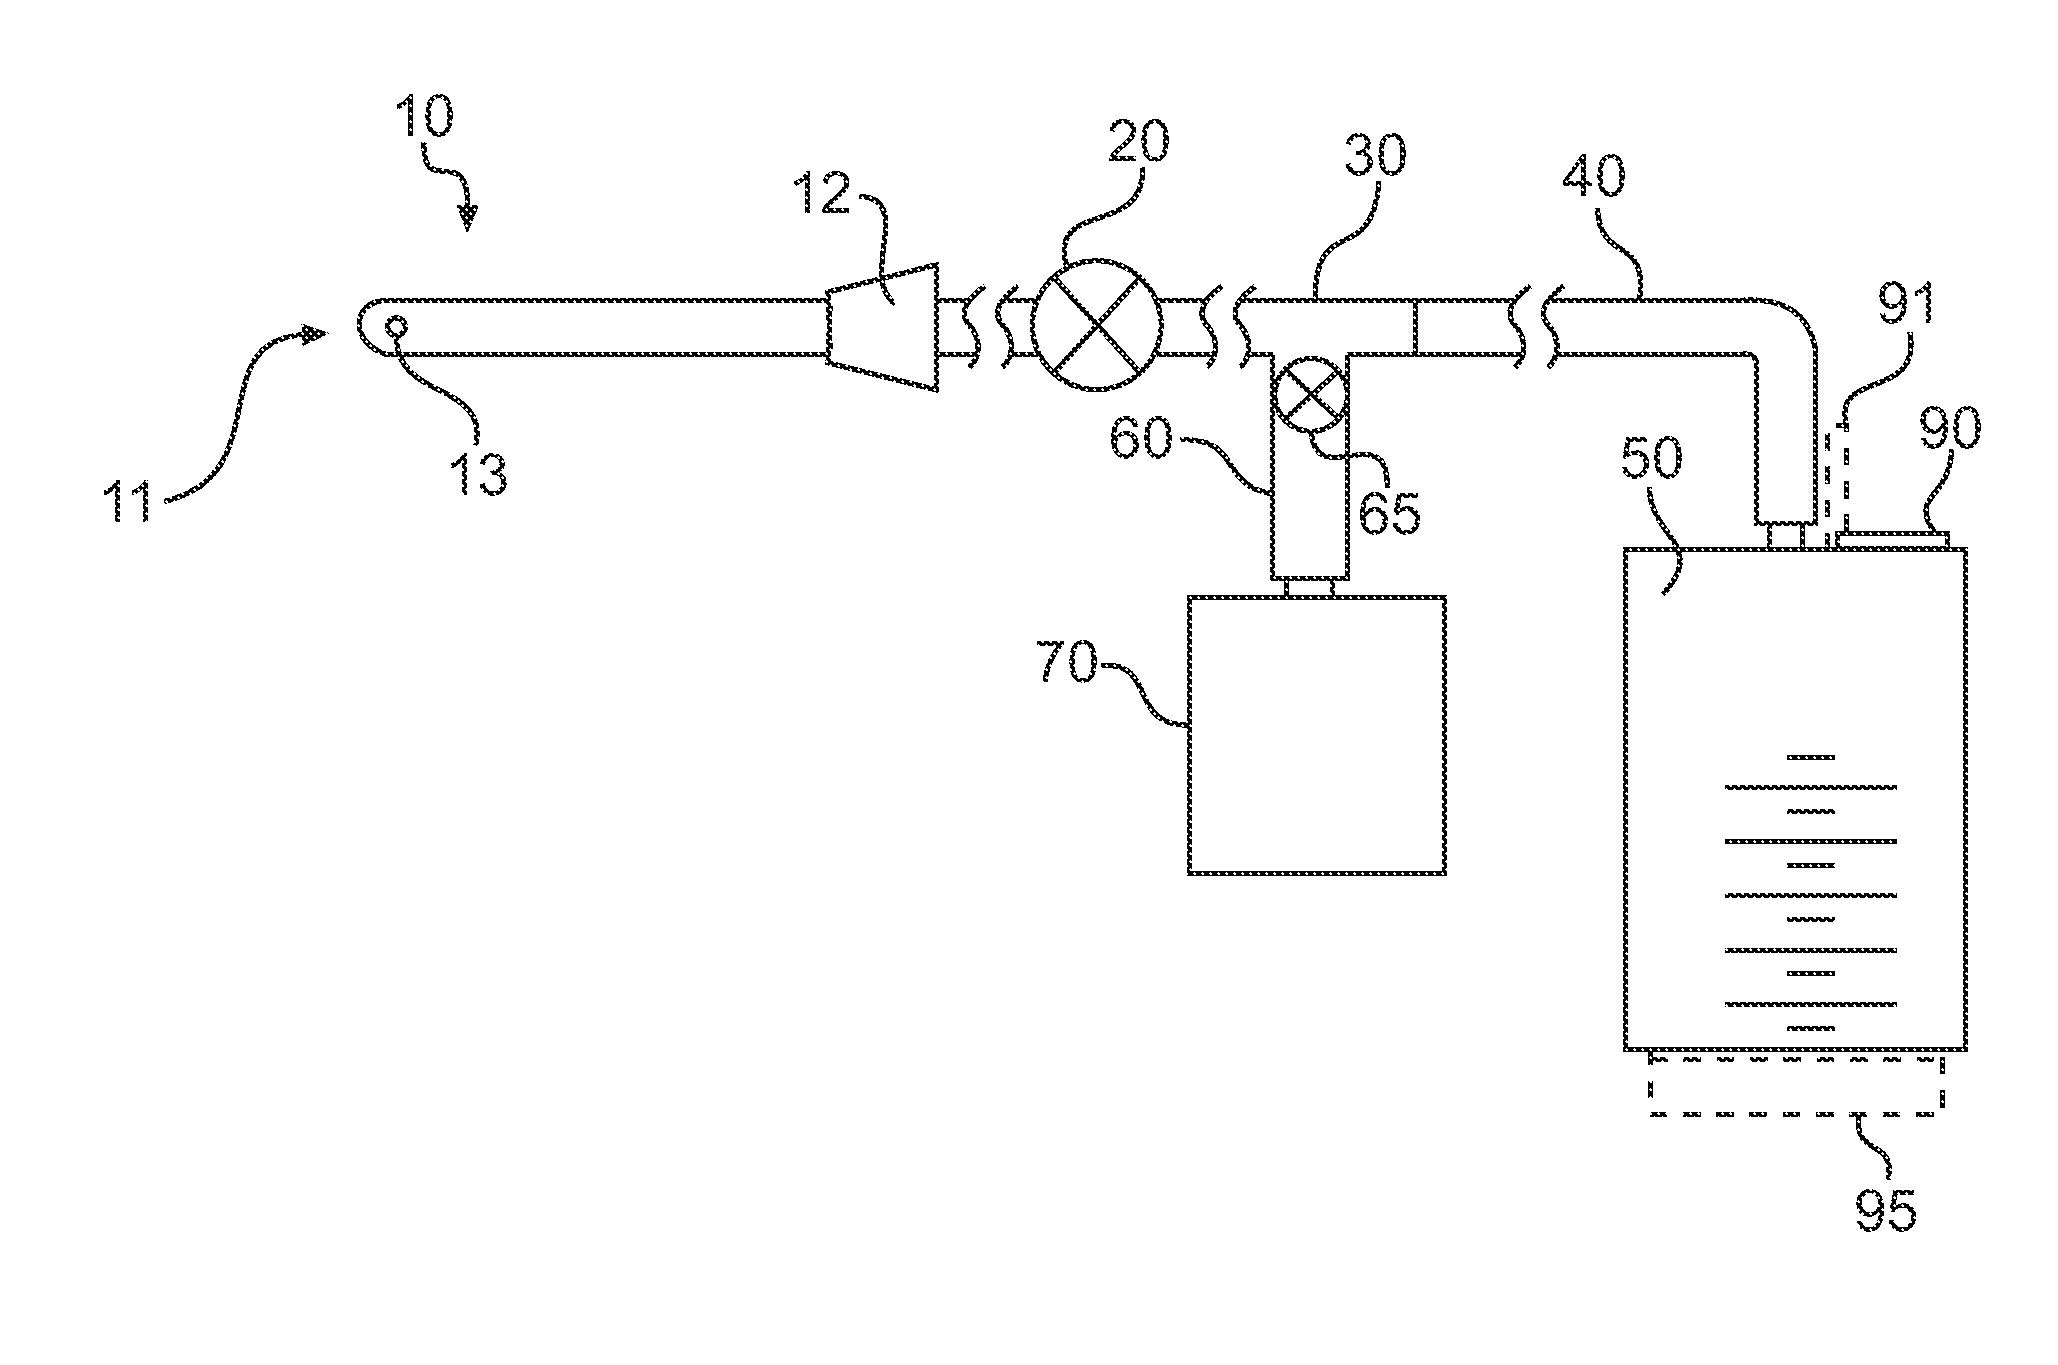 Automated Method of Pooling Elimination with a Biological Fluid Collection System